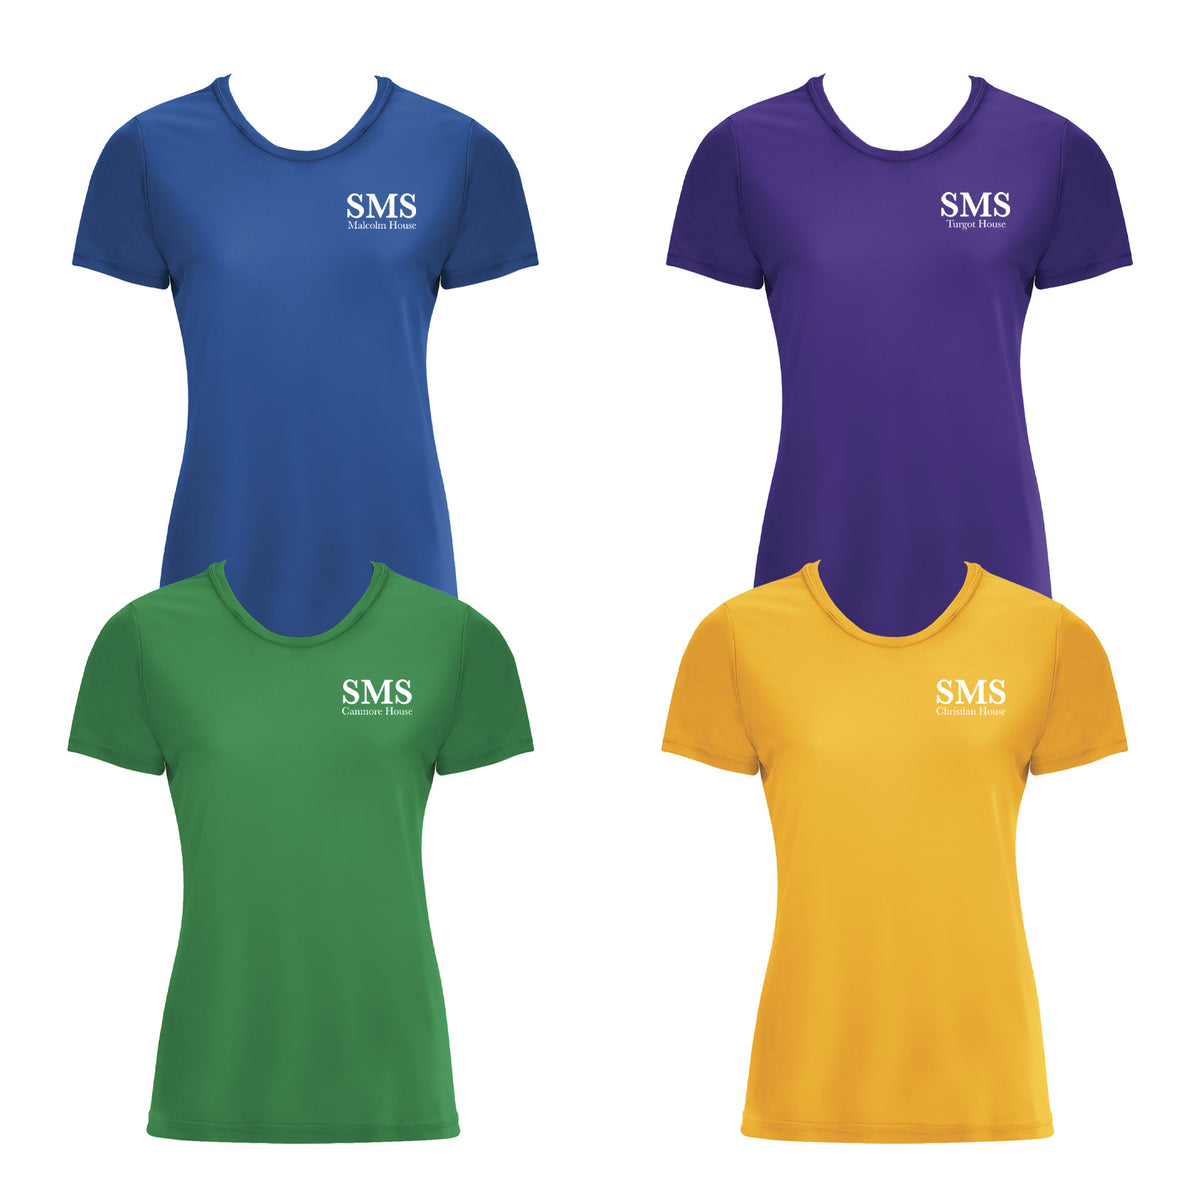 SMS HOUSE T-SHIRT, WICKING, LADIES